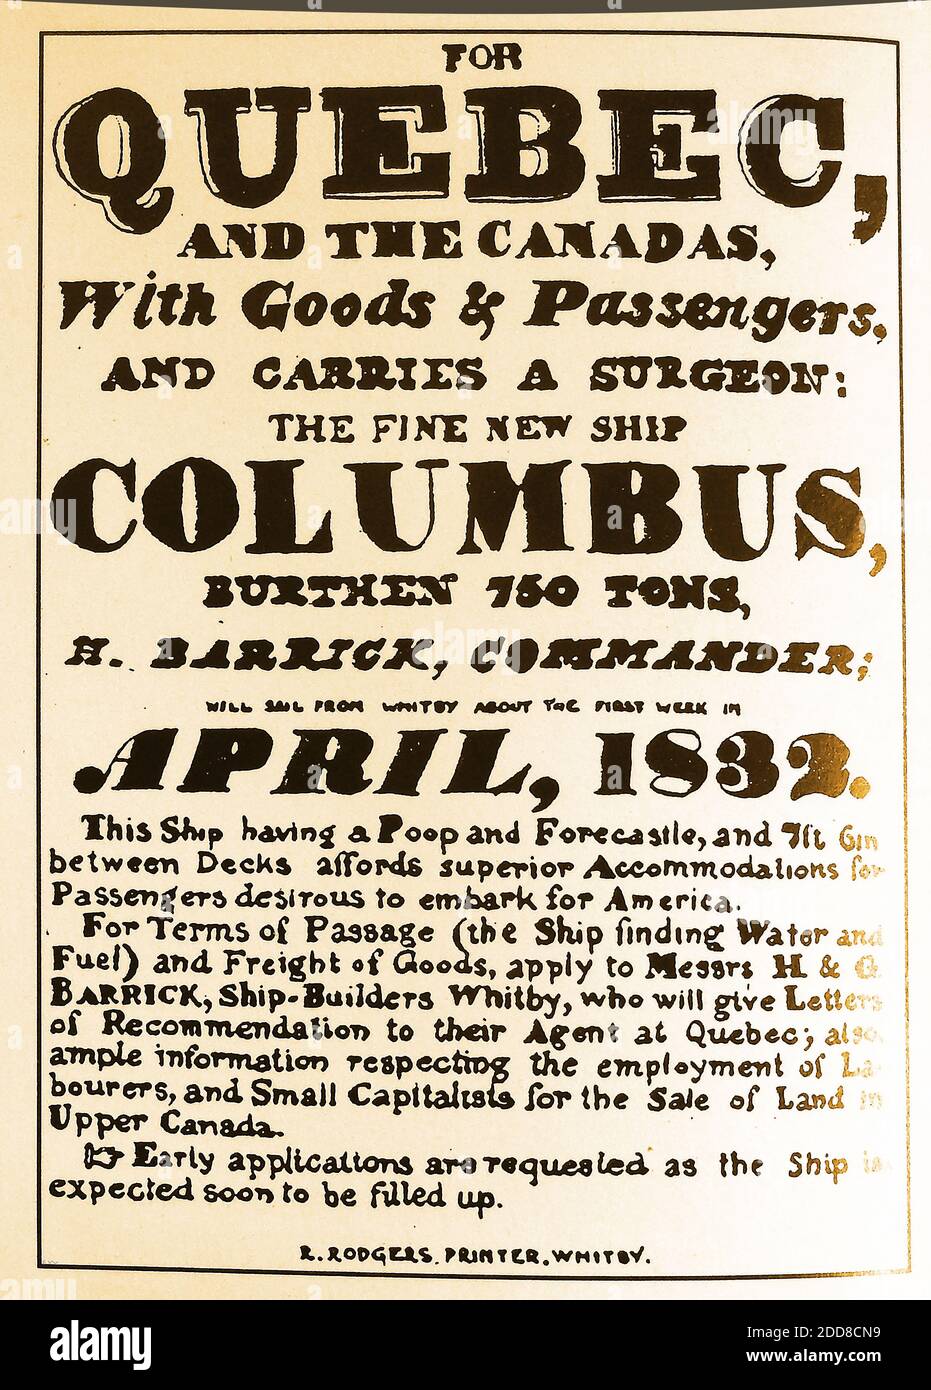 English emigration poster for the ship Columbus travelling to Quebec and Canada in April 1832. Commander is listed as H. Barrick (of H and G Barrick's shipyard, Whitby, Yorkshire, UK. - (Technical Information - COLUMBUS, specially built emigrant ship of 467 tons, built by Henry.& George Barrick, Whitby in 1832. Sailed from Whitby April 16th 1832 for Quebec with 245 passengers, Capt. H. Barrick.). Though the journey was recorded as a good one, many people suffered seasickness and three children died on route. A group of religious passengers prayed daily to the mockery and bad language of others Stock Photo